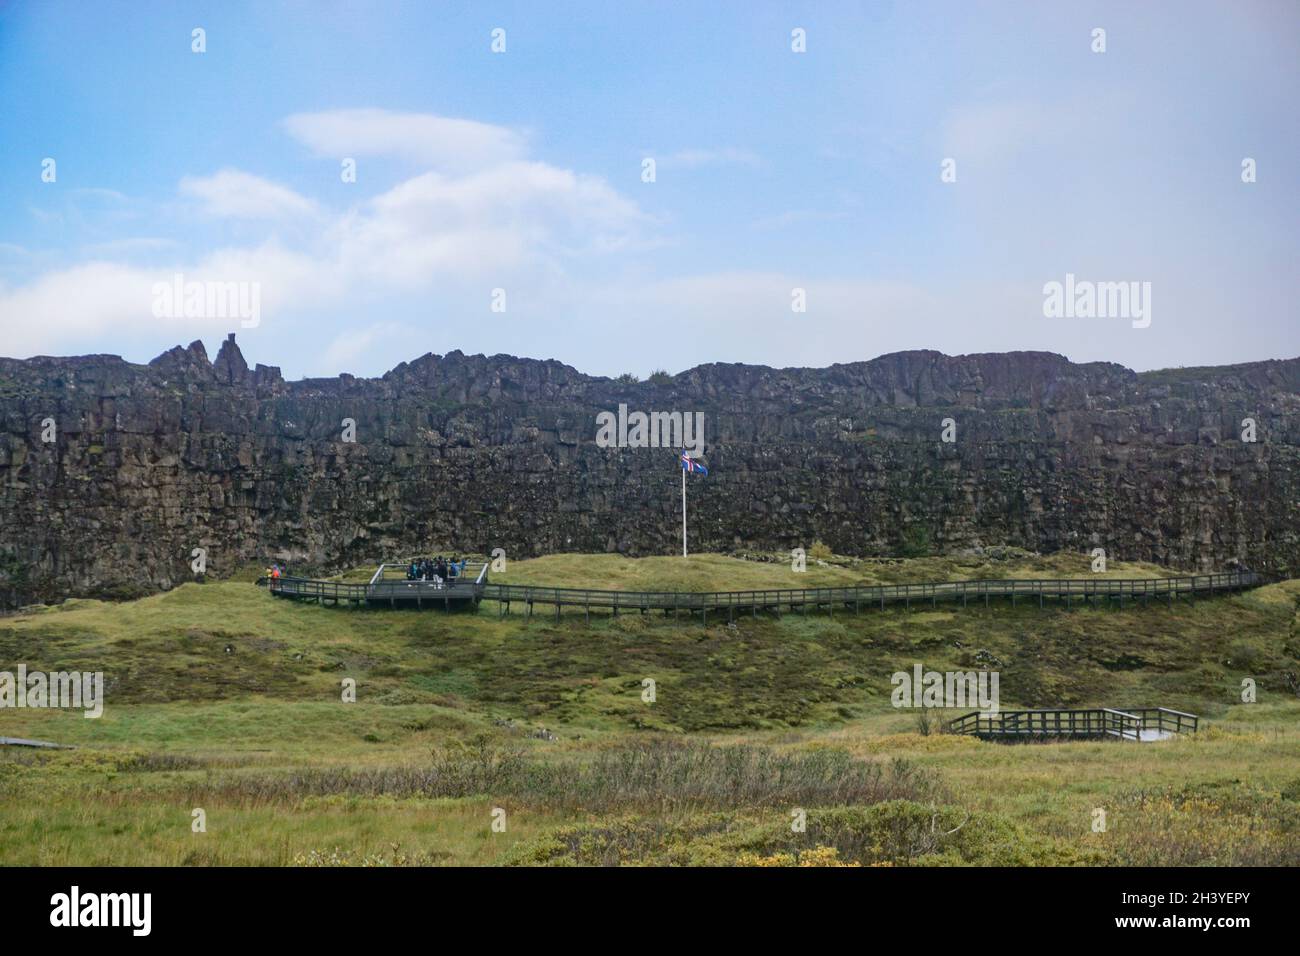 Thingvellir National Park, Iceland: Original site of the Althing, or General Assembly, established in 930 C.E., the world’s oldest existing parliament Stock Photo